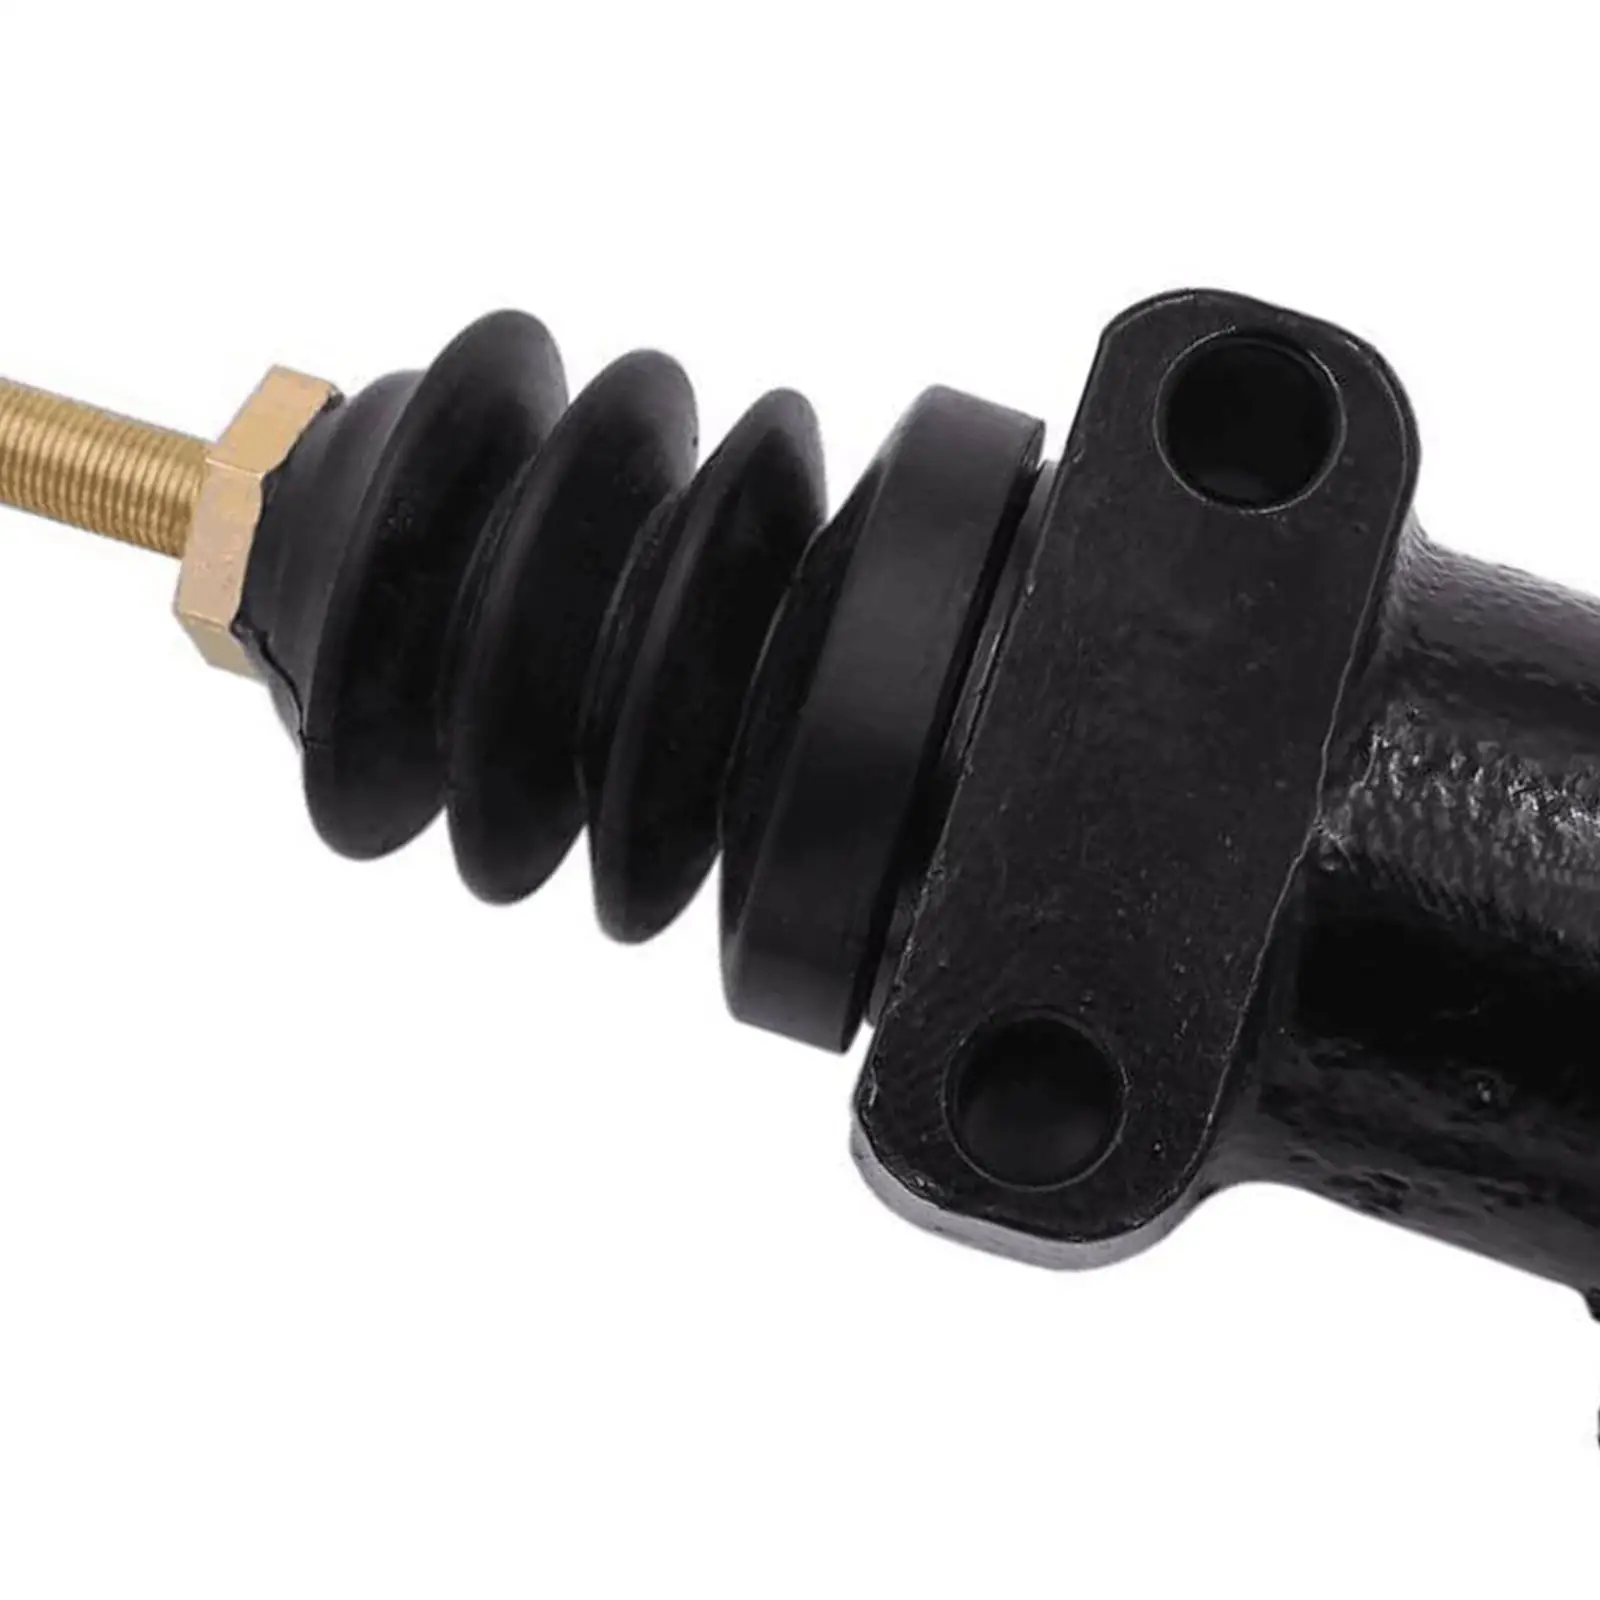 Clutch Slave Cylinder 8089526 8075008 for Vnl Spare Parts Replaces Easily